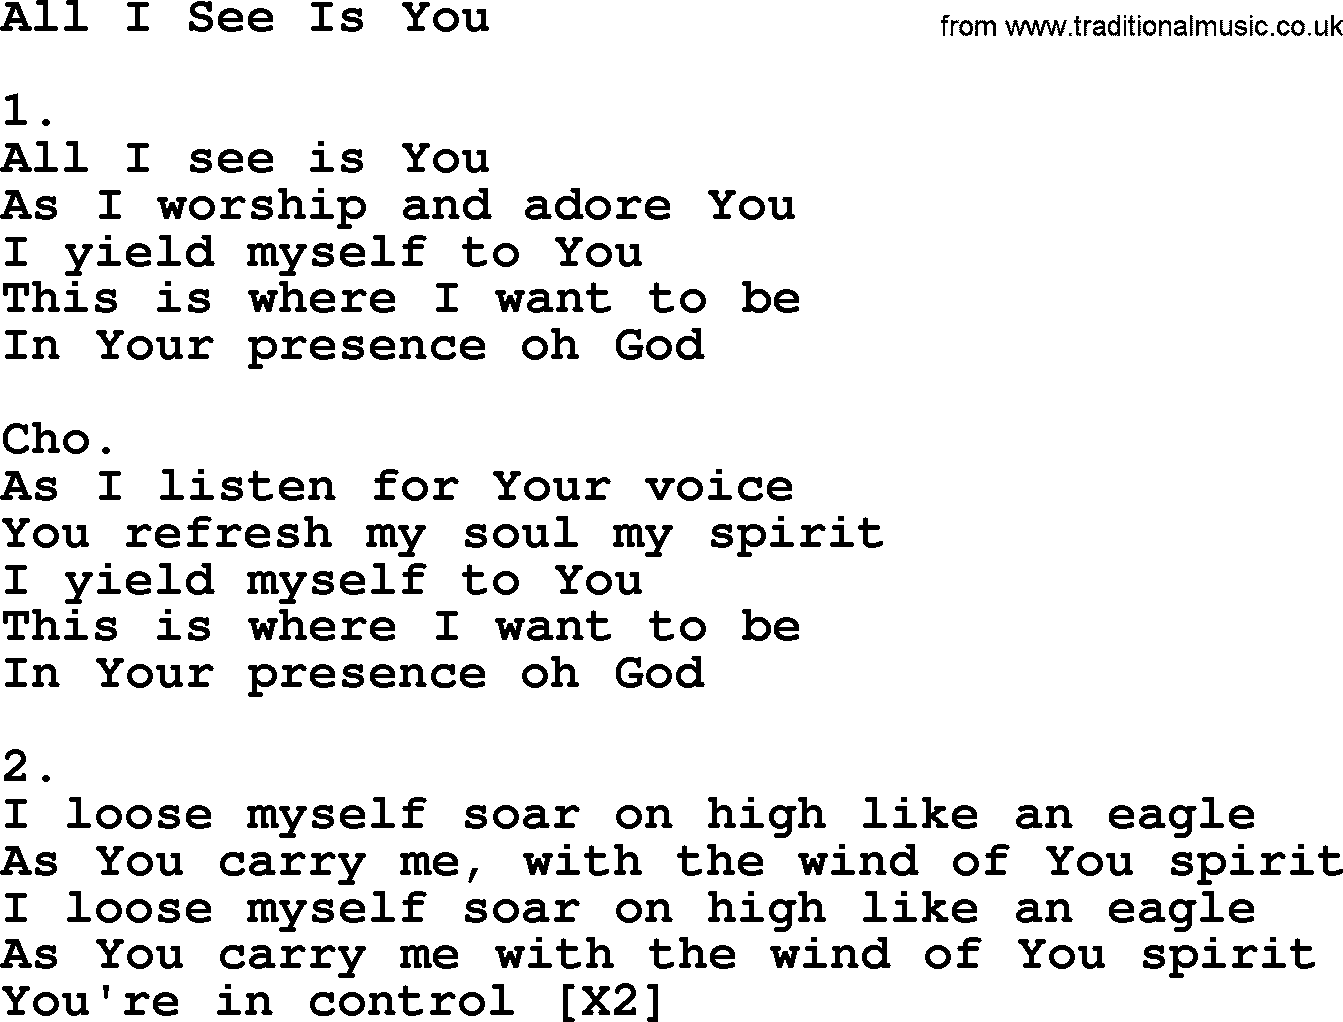 Apostolic & Pentecostal Hymns and Songs, Hymn: All I See Is You lyrics and PDF